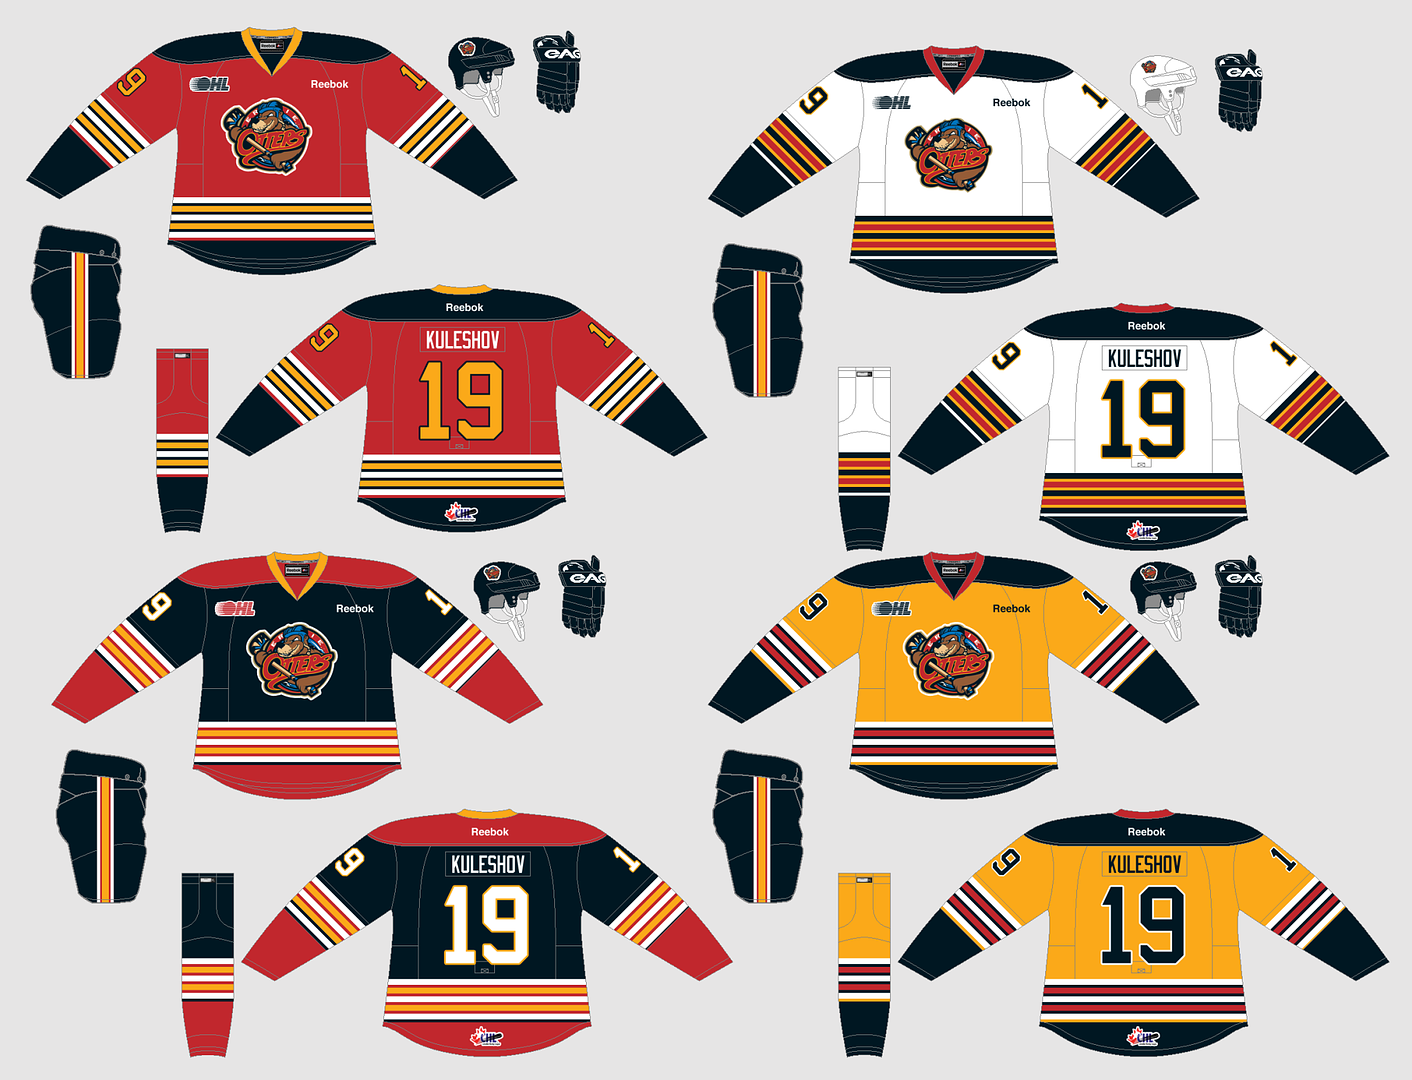 ERIEOtters_zps9f814c6a.png